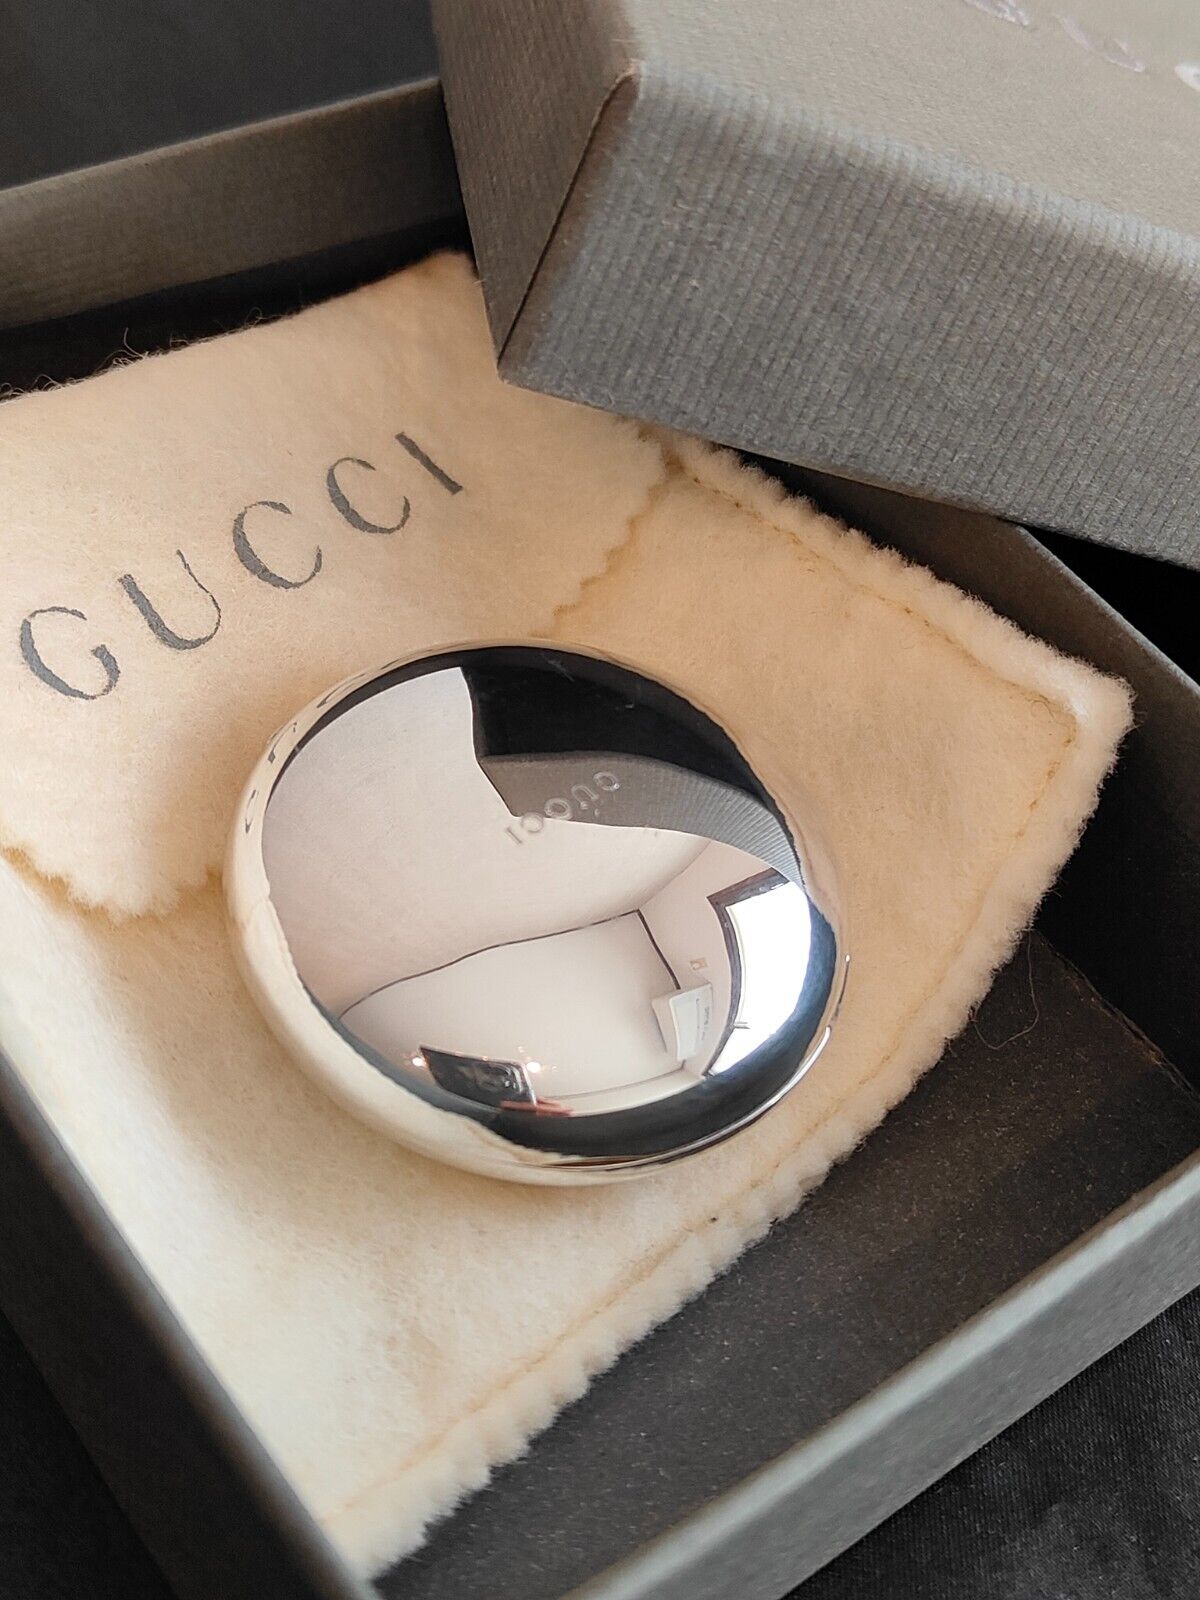 Gucci Pill Box Trinket Ashtray Case Silver Plated metal with Box